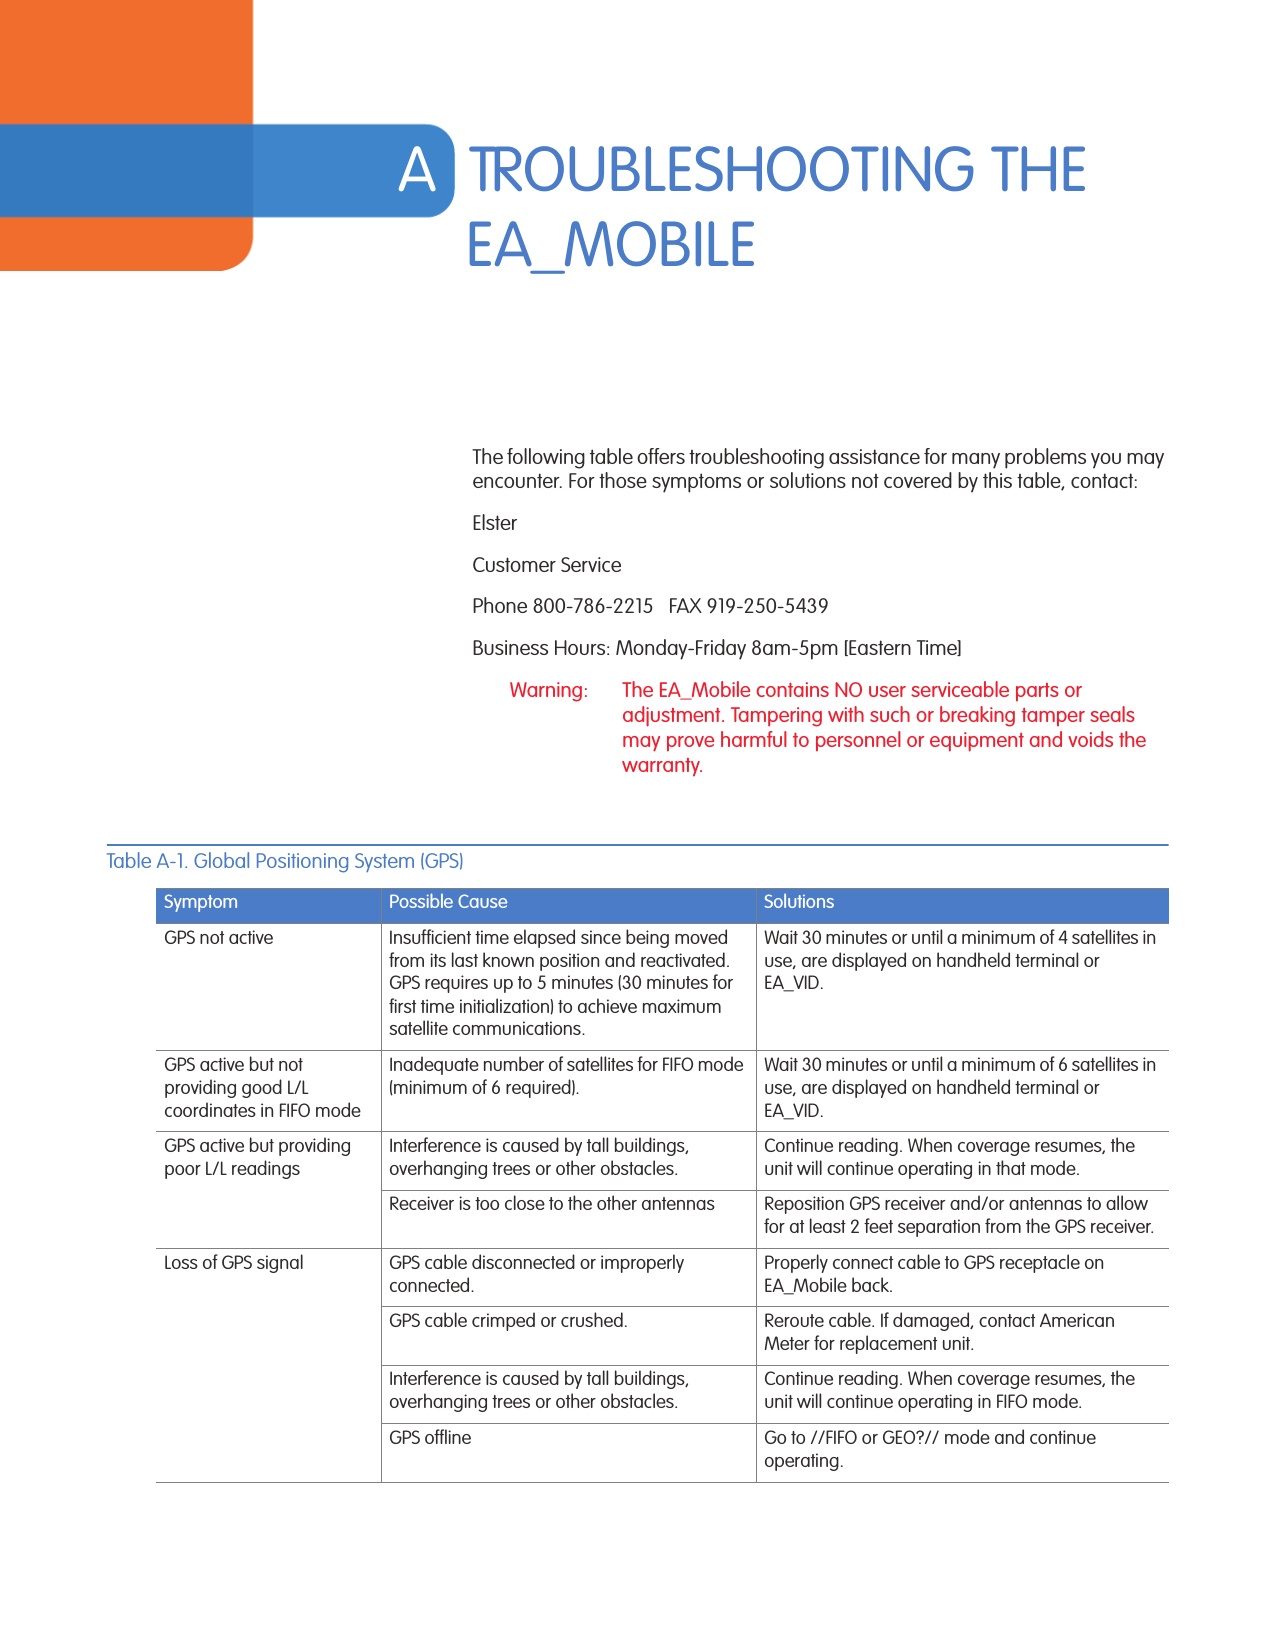 ATROUBLESHOOTING THE EA_MOBILEThe following table offers troubleshooting assistance for many problems you may encounter. For those symptoms or solutions not covered by this table, contact:ElsterCustomer ServicePhone 800-786-2215   FAX 919-250-5439Business Hours: Monday-Friday 8am-5pm [Eastern Time]Warning: The EA_Mobile contains NO user serviceable parts or adjustment. Tampering with such or breaking tamper seals may prove harmful to personnel or equipment and voids the warranty.Table A-1. Global Positioning System (GPS)Symptom Possible Cause SolutionsGPS not active Insufficient time elapsed since being moved from its last known position and reactivated. GPS requires up to 5 minutes (30 minutes for first time initialization) to achieve maximum satellite communications.Wait 30 minutes or until a minimum of 4 satellites in use, are displayed on handheld terminal or EA_VID. GPS active but not providing good L/L coordinates in FIFO modeInadequate number of satellites for FIFO mode (minimum of 6 required).Wait 30 minutes or until a minimum of 6 satellites in use, are displayed on handheld terminal or EA_VID.GPS active but providing poor L/L readingsInterference is caused by tall buildings, overhanging trees or other obstacles.Continue reading. When coverage resumes, the unit will continue operating in that mode. Receiver is too close to the other antennas Reposition GPS receiver and/or antennas to allow for at least 2 feet separation from the GPS receiver.Loss of GPS signal GPS cable disconnected or improperly connected.Properly connect cable to GPS receptacle on EA_Mobile back.GPS cable crimped or crushed. Reroute cable. If damaged, contact American Meter for replacement unit.Interference is caused by tall buildings, overhanging trees or other obstacles.Continue reading. When coverage resumes, the unit will continue operating in FIFO mode.GPS offline Go to //FIFO or GEO?// mode and continue operating.EA Mobile User Guide